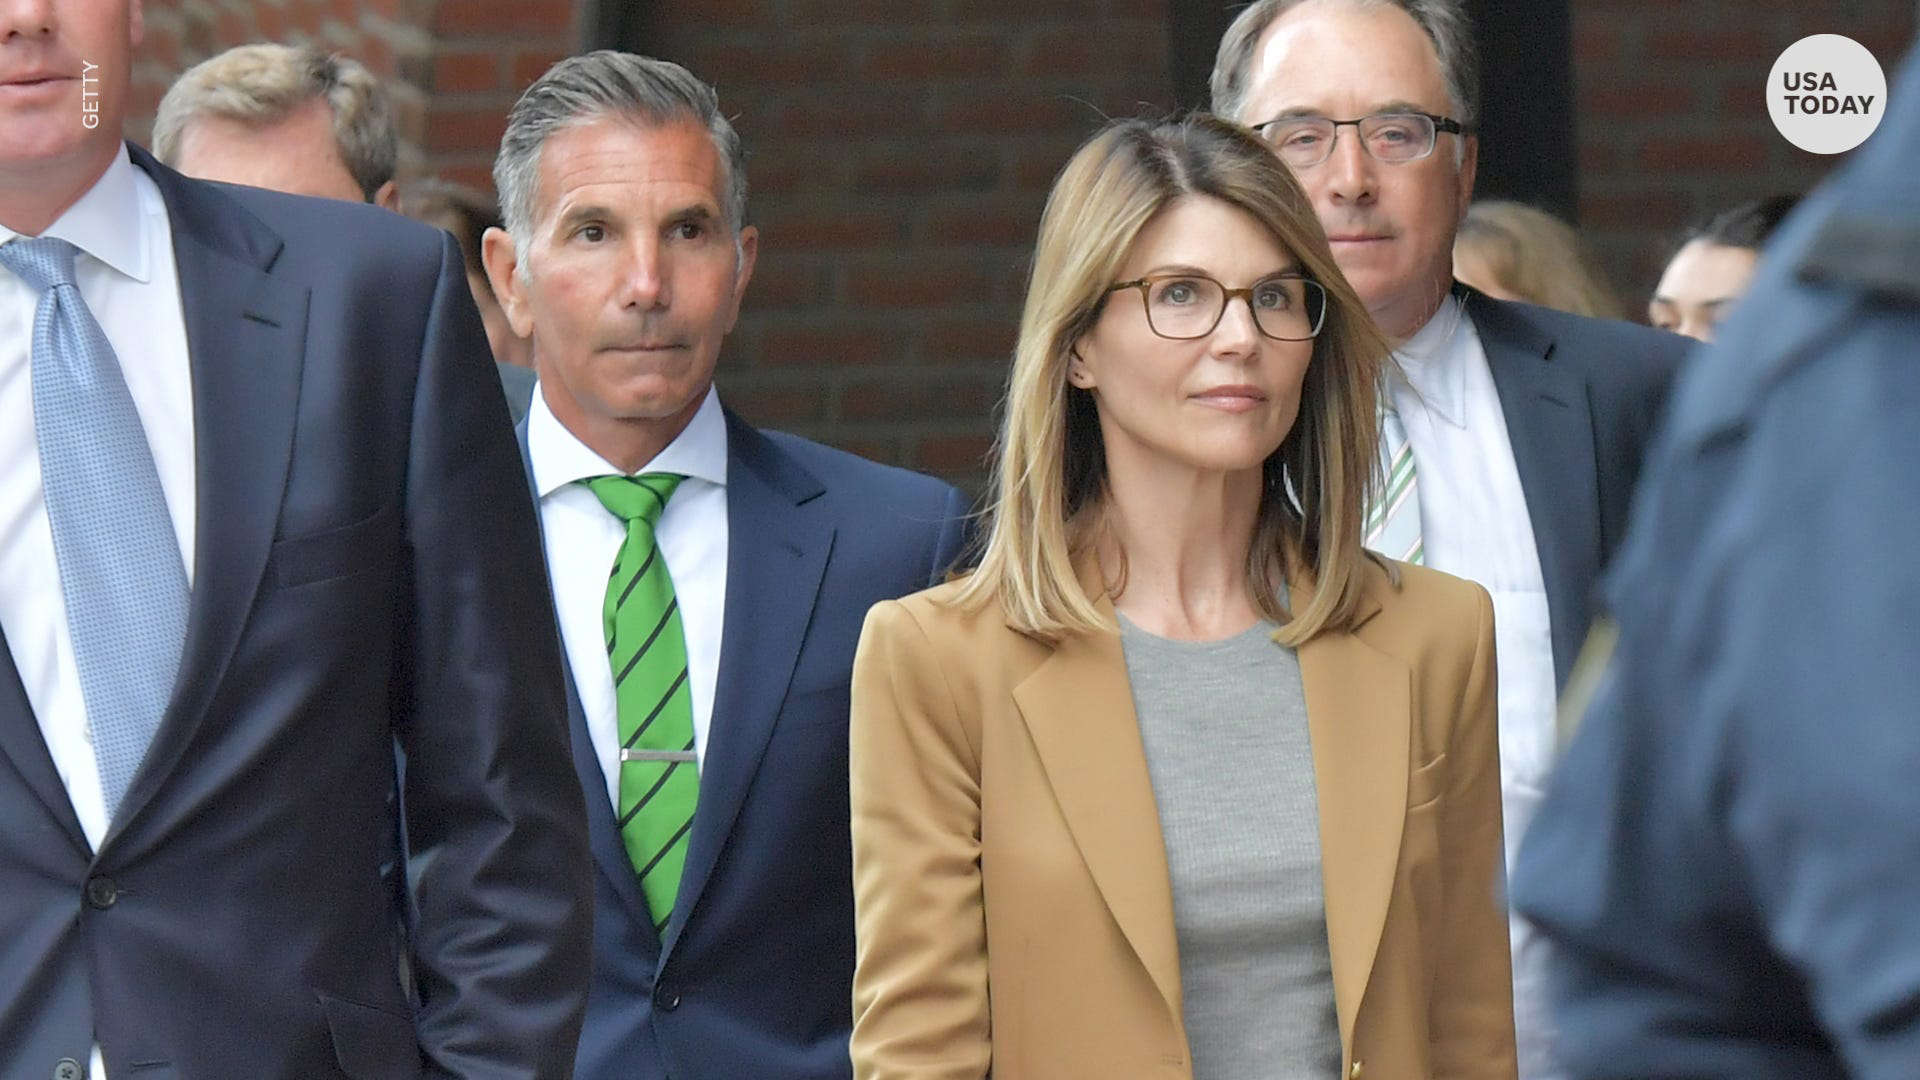 Lori Loughlin, Husband Mossimo Giannulli Sentenced to Prison in College Admissions Scandal BB14qbTA